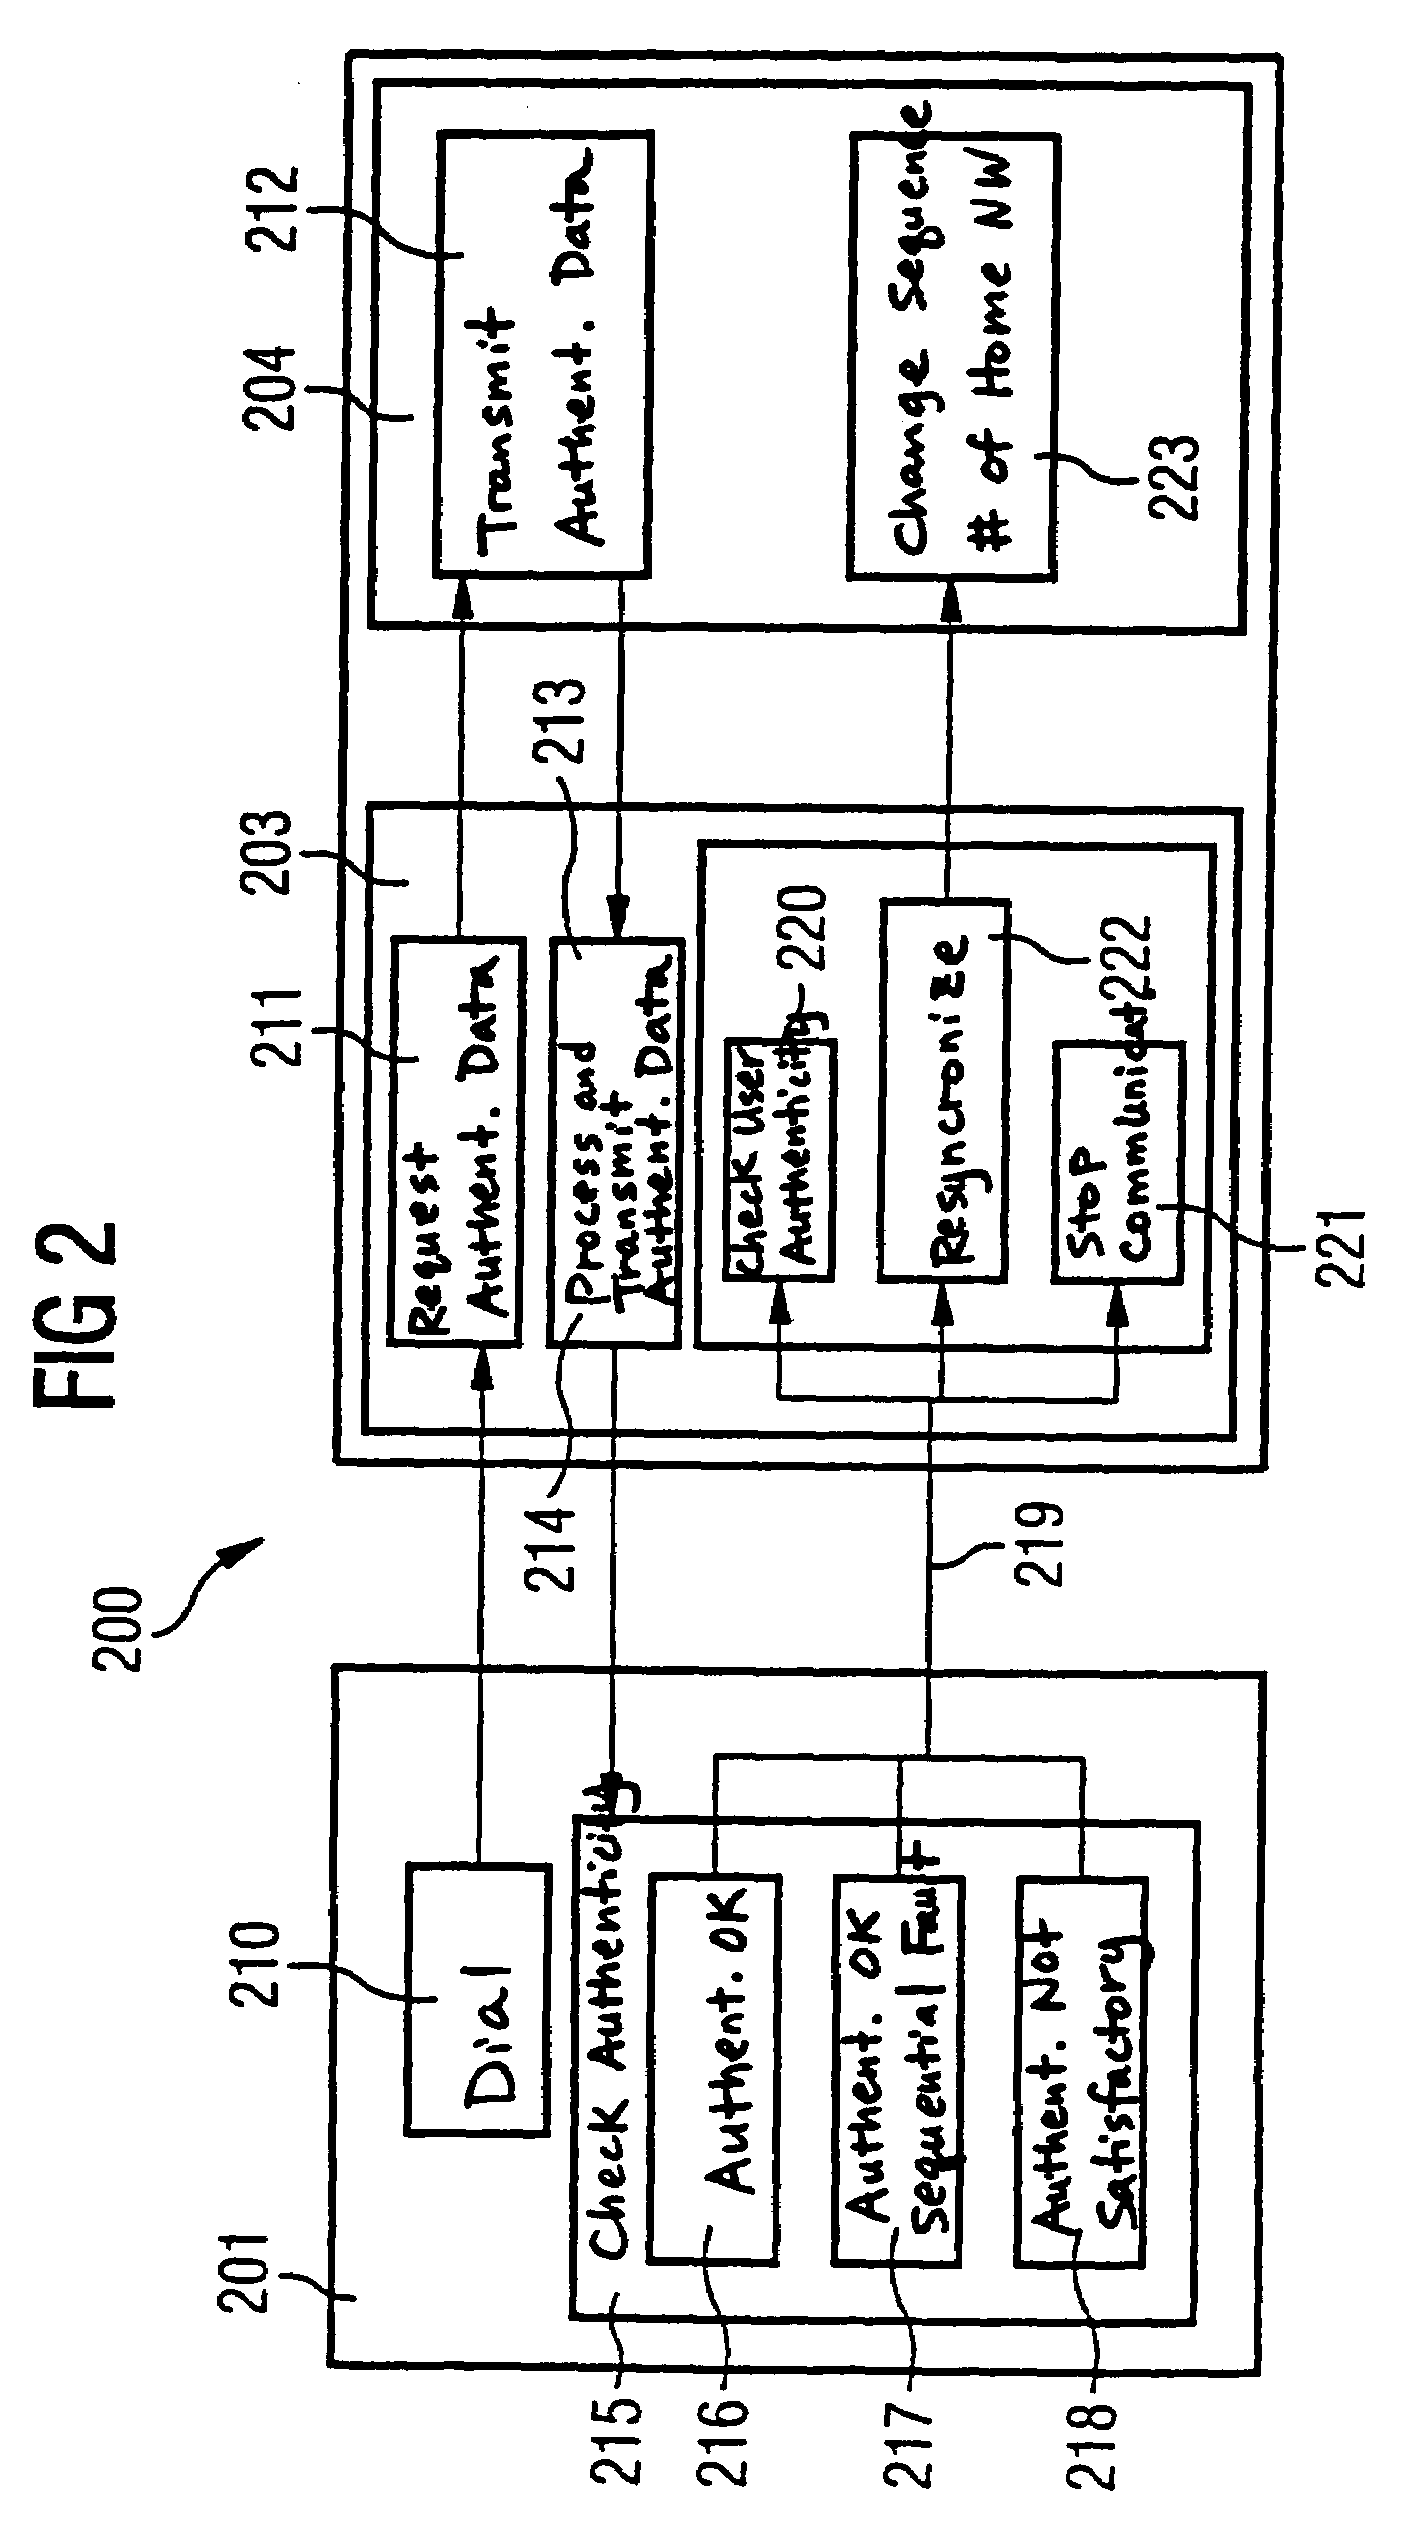 Method and system for verifying the authenticity of a first communication participants in a communications network